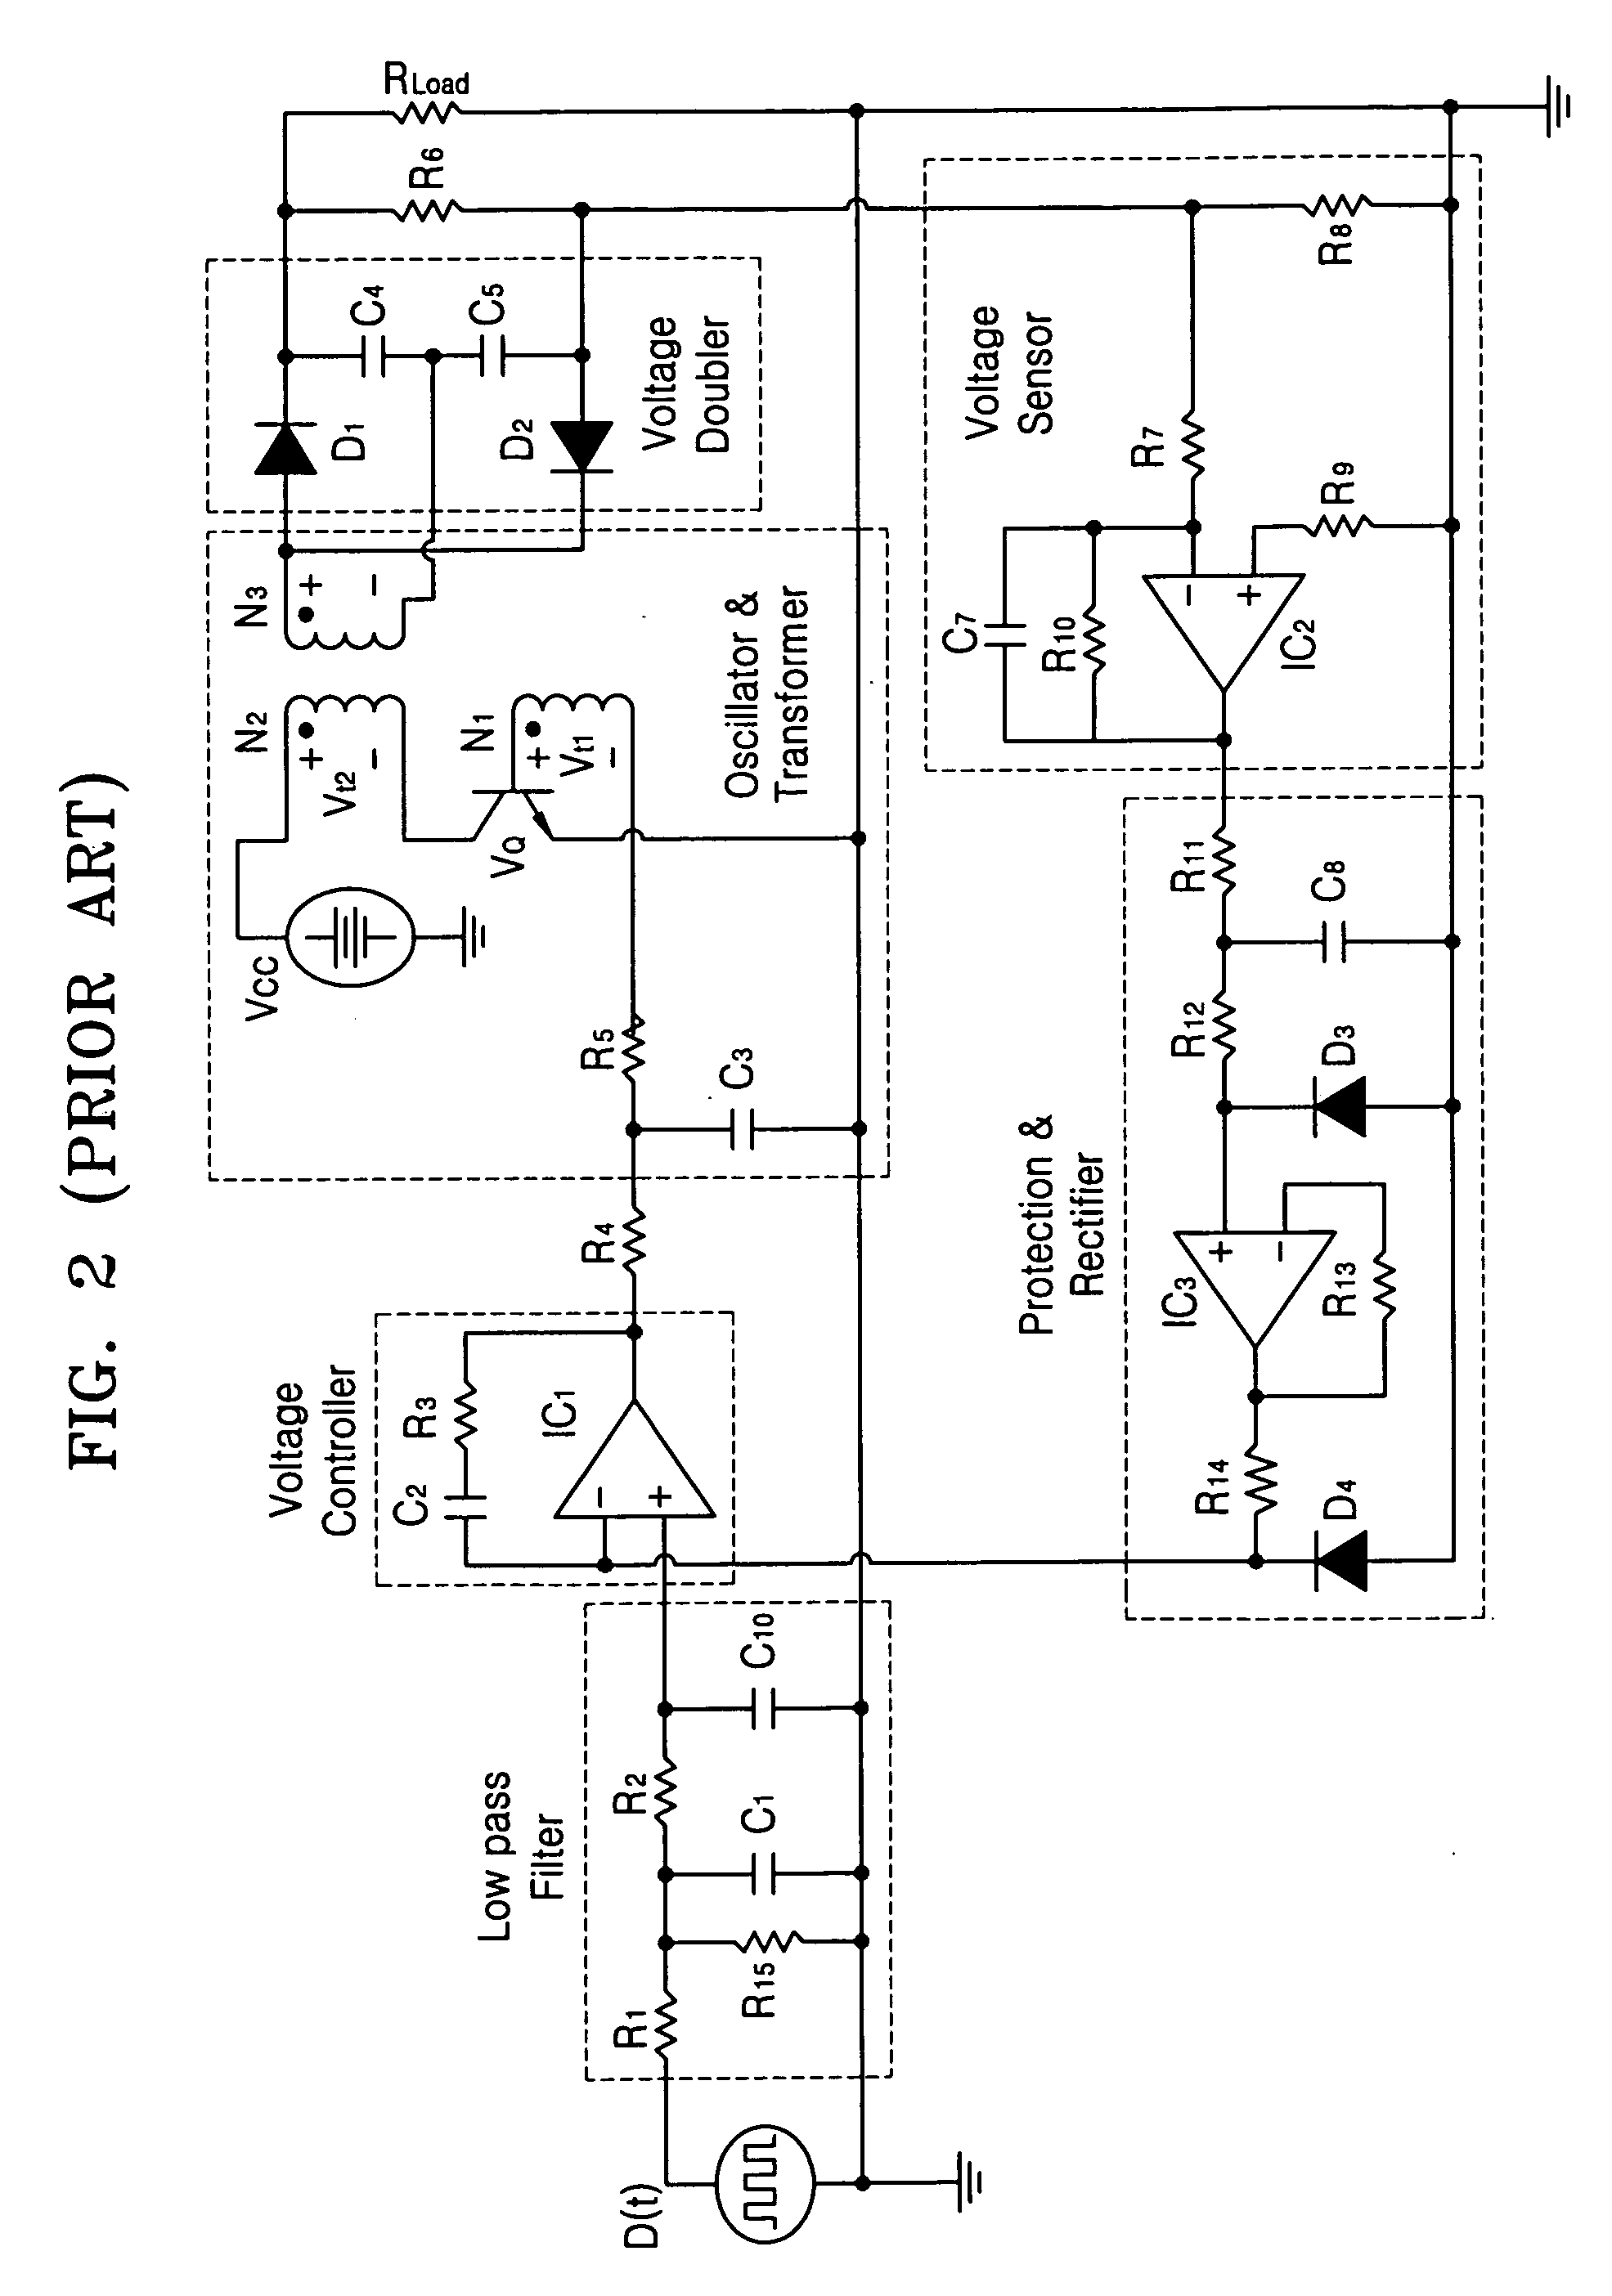 Analog control ASIC apparatus for high voltage power supply in image forming apparatus and method for controlling high voltage power supply